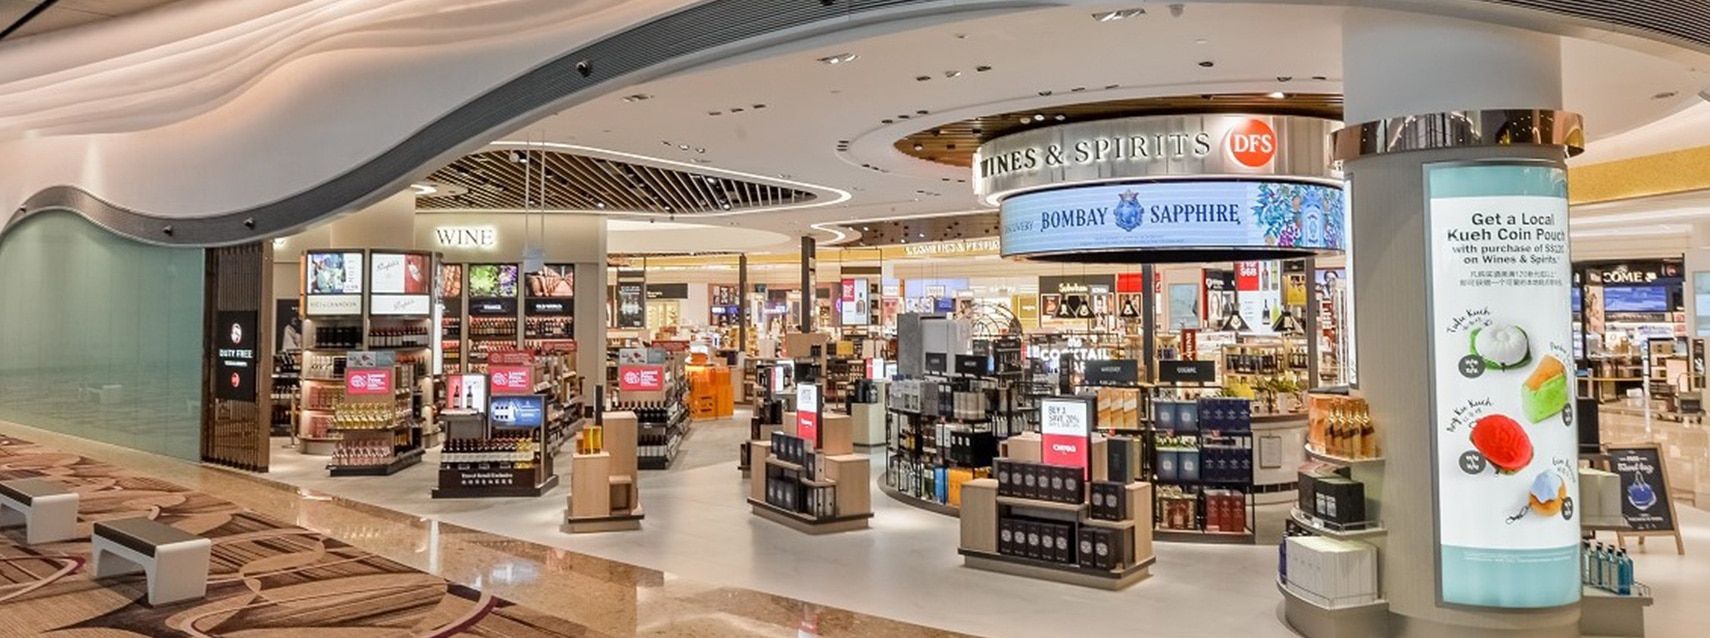 DFS Singapore Pulls Out of Changi Airport